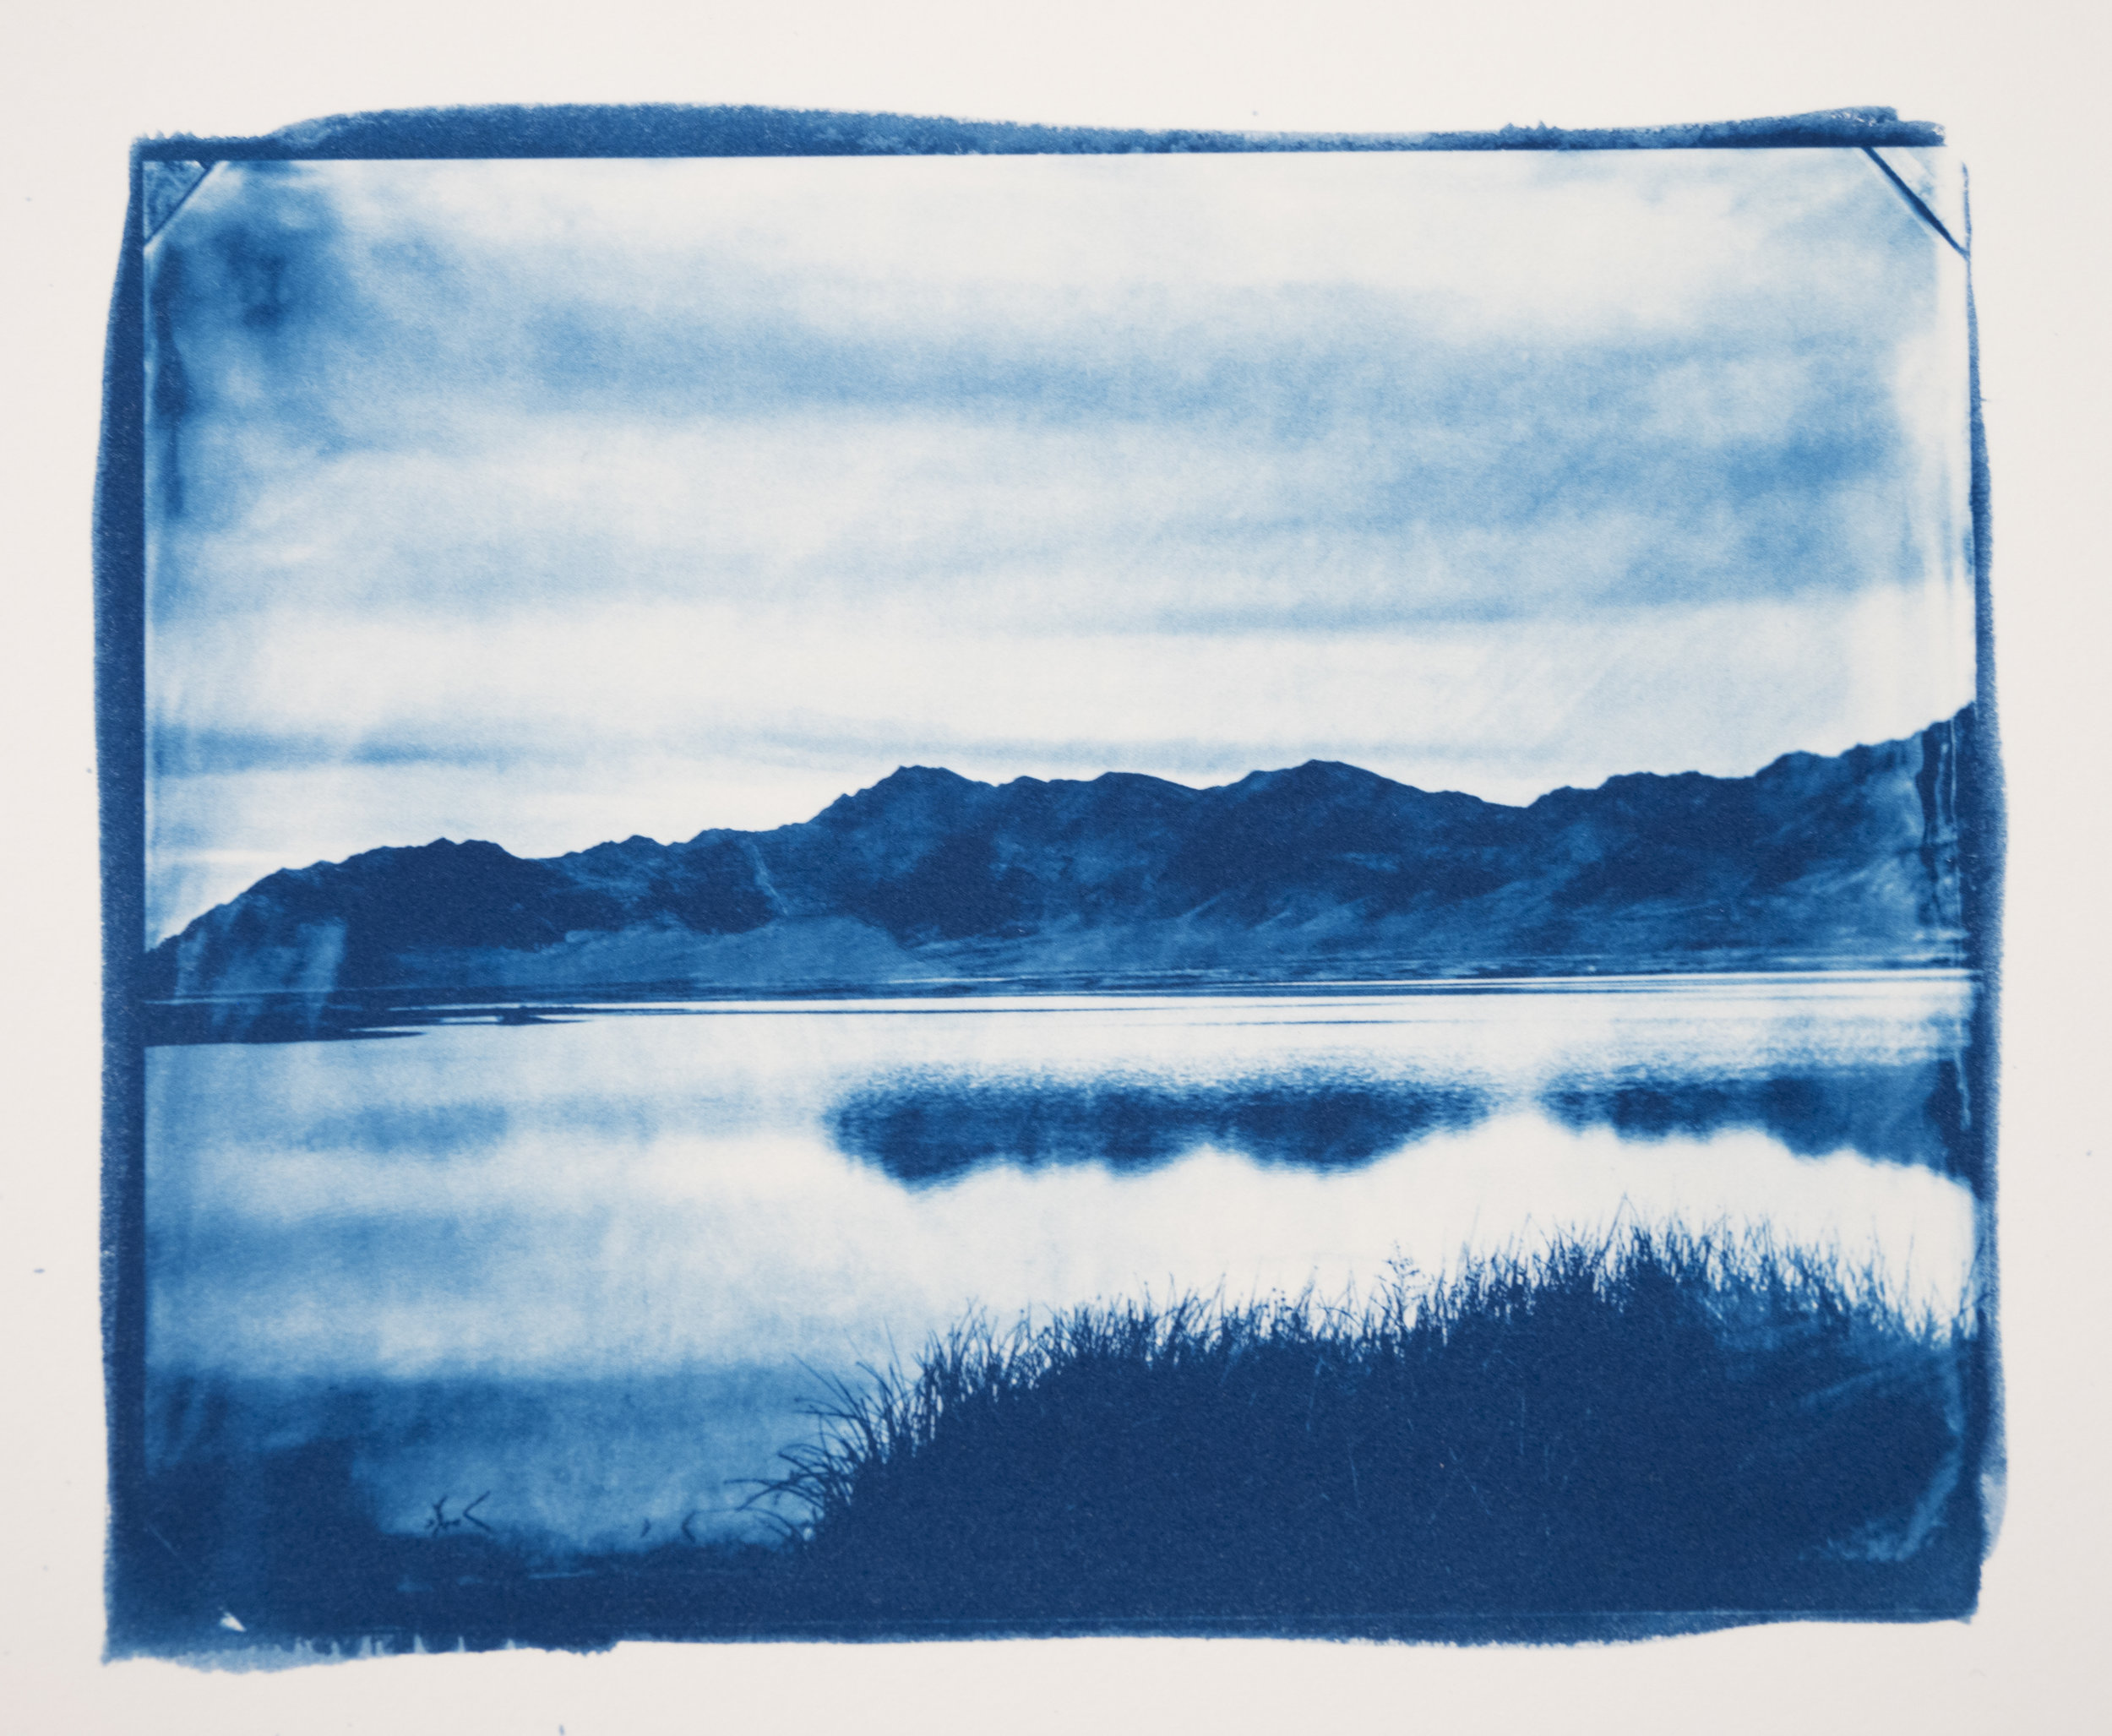 Historical Processes: The Cyanotype